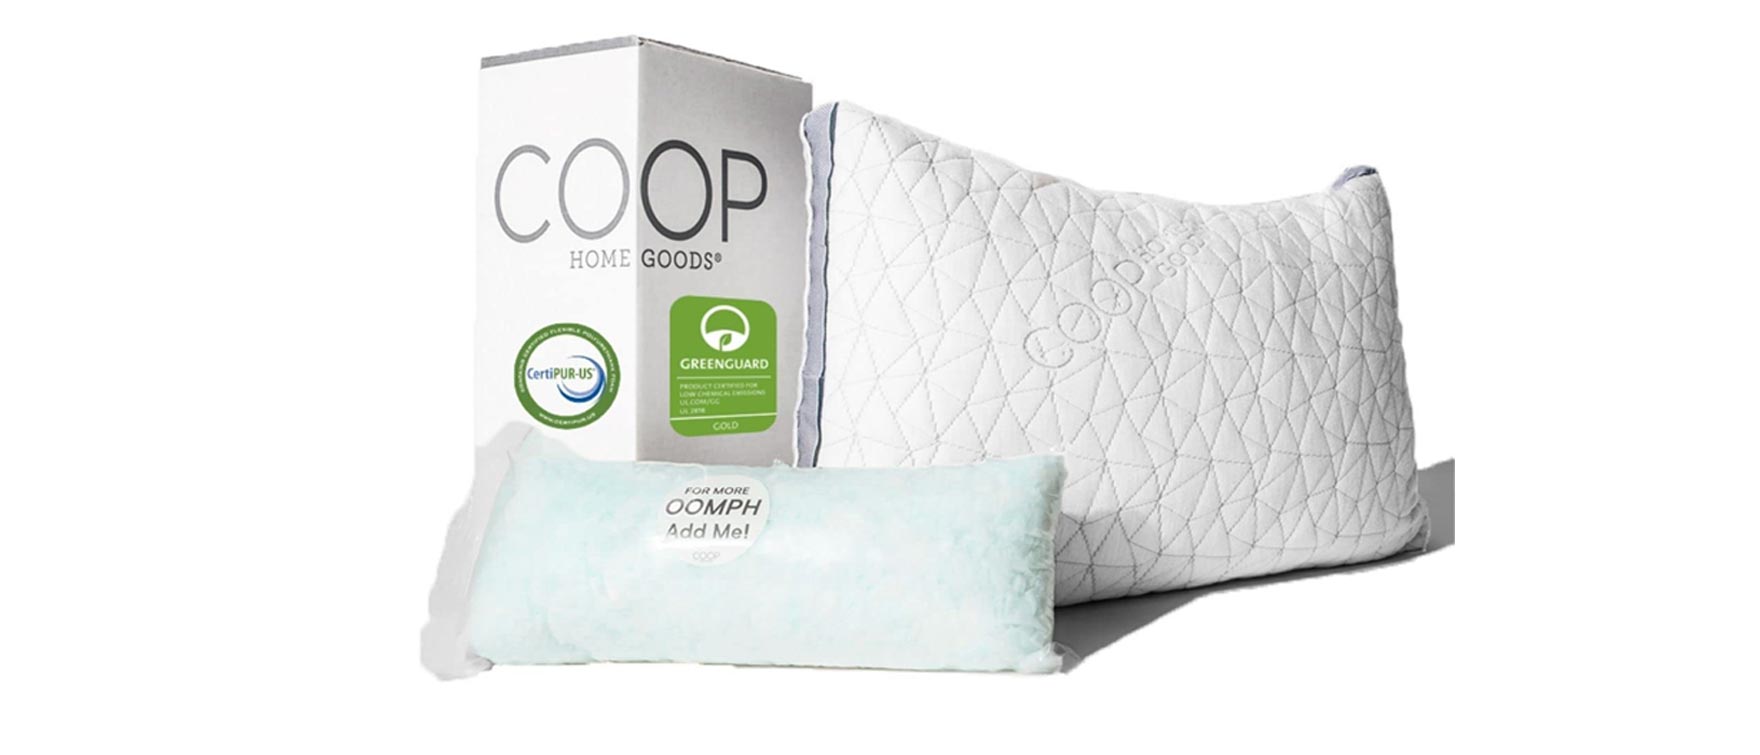 1. Best Overall Pillow for Stomach Sleepers: Coop Home Goods